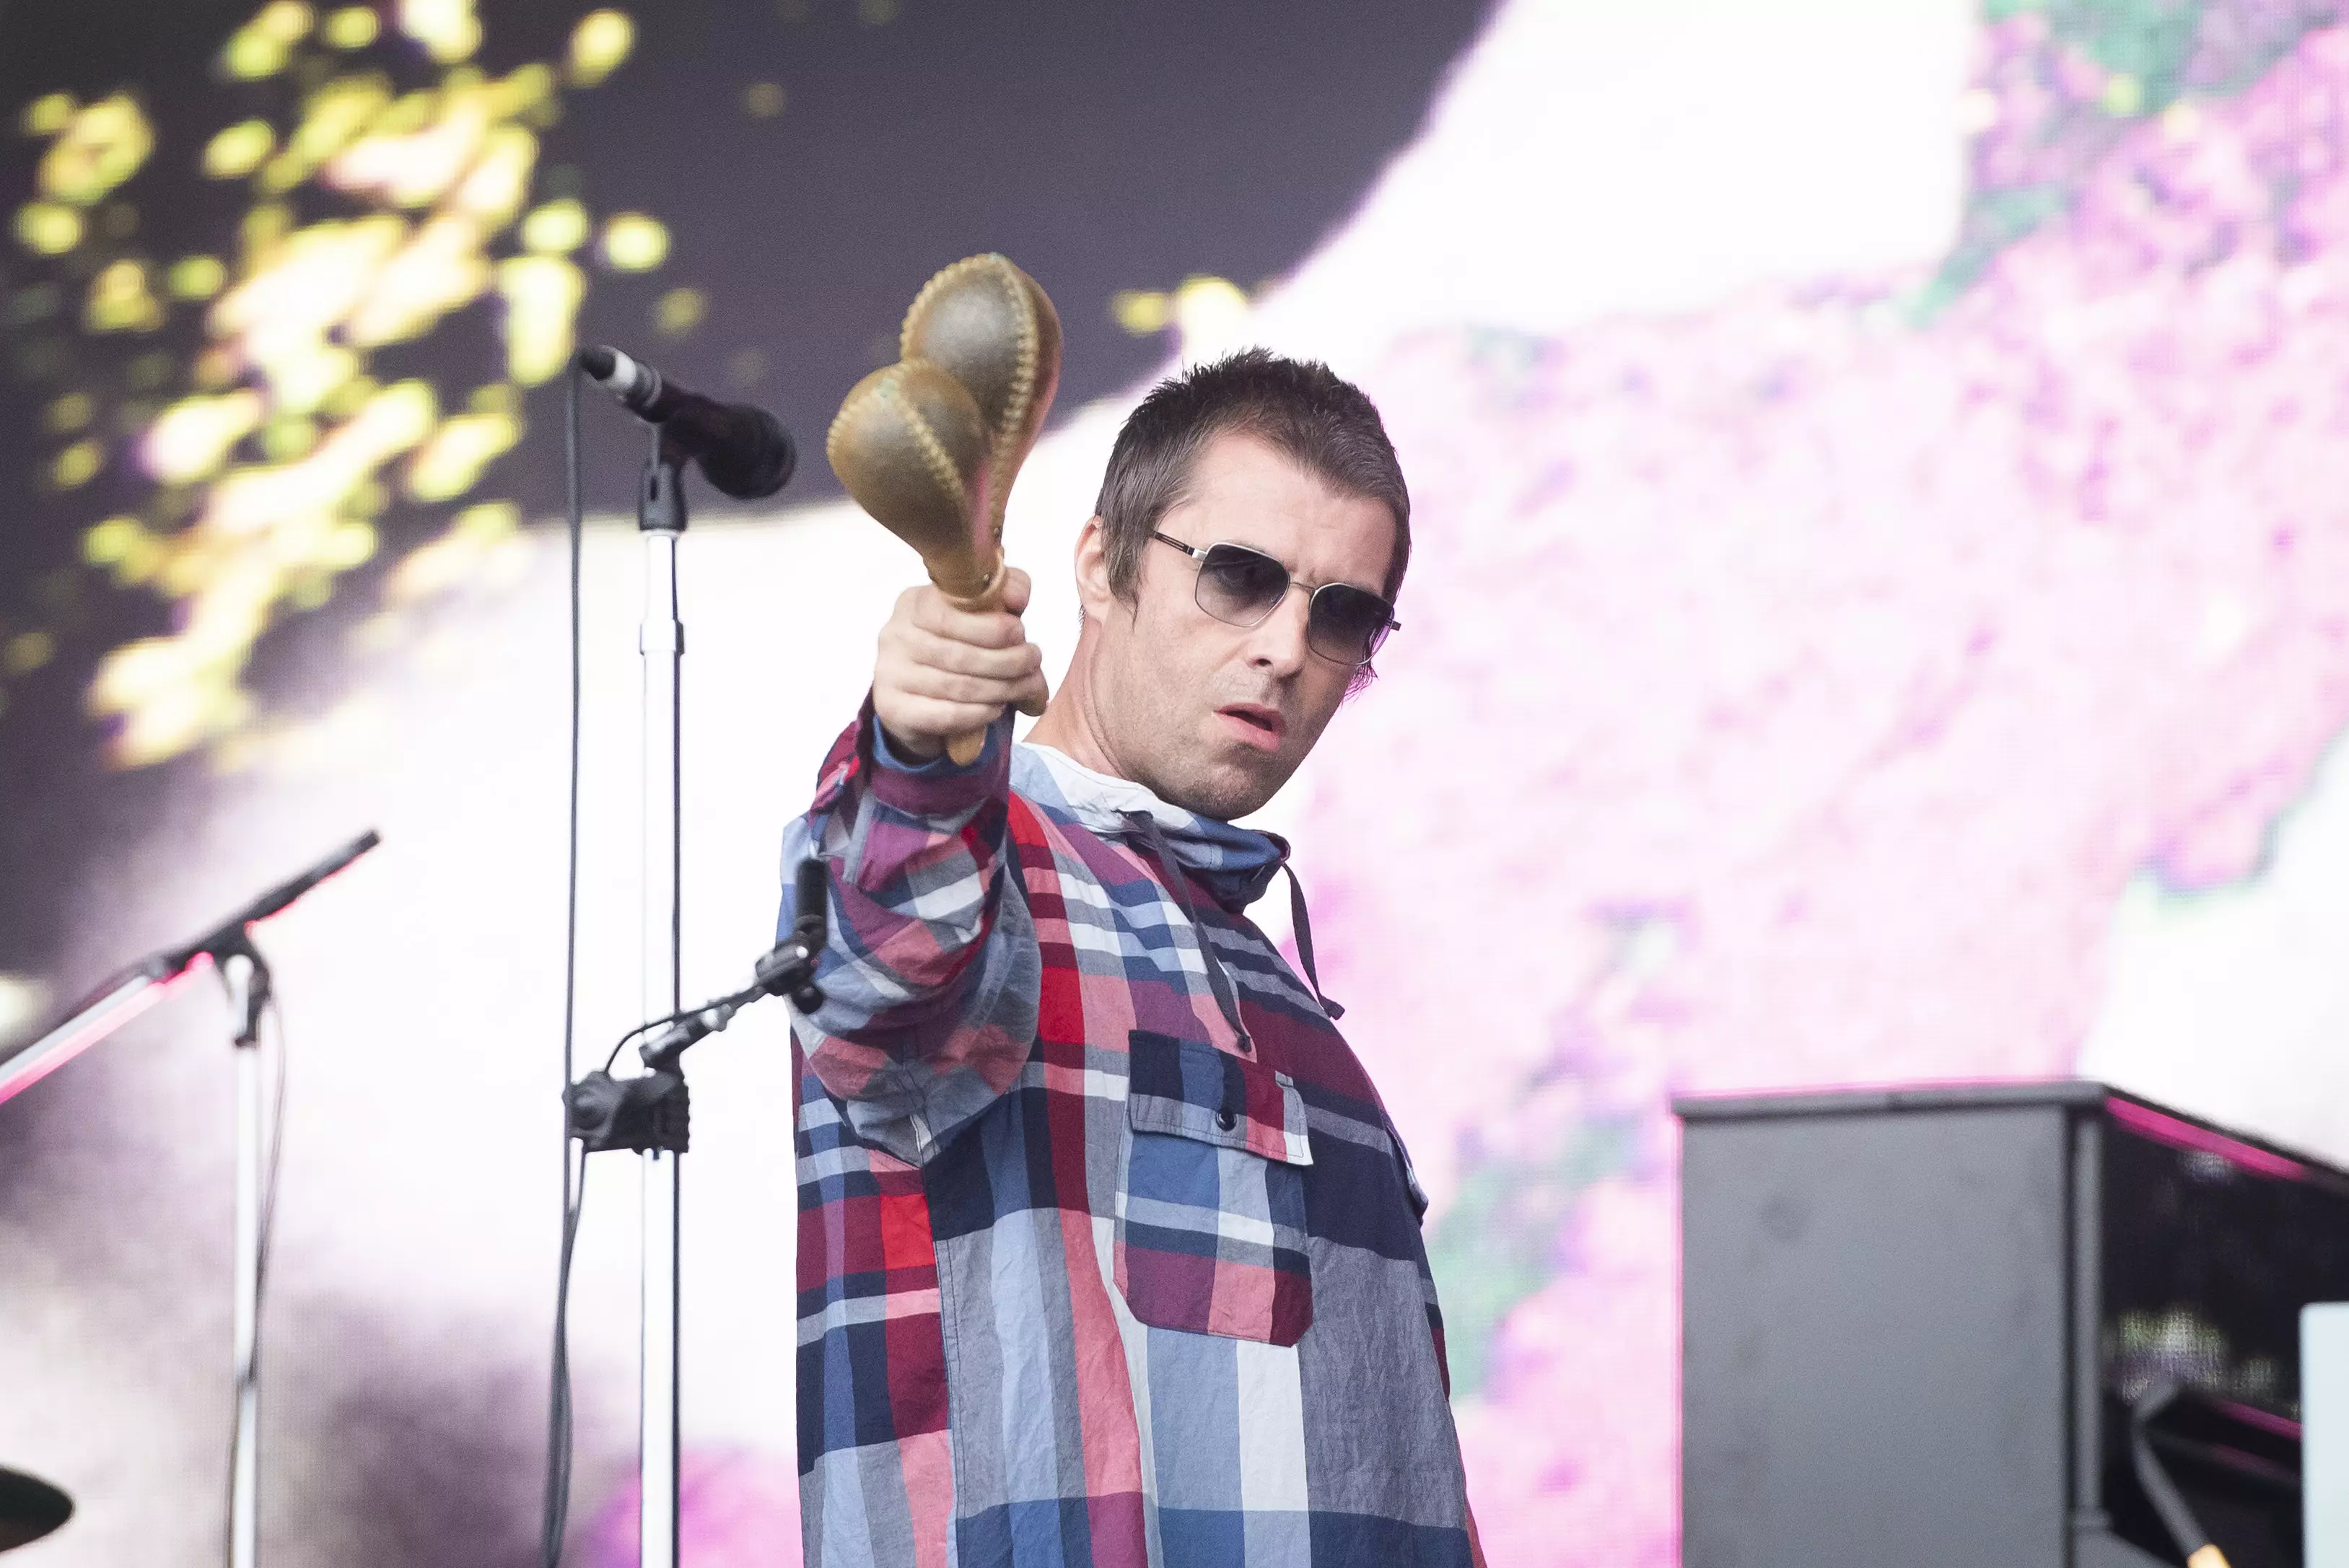 Liam Gallagher reportedly send threatening messages to Noel's family.